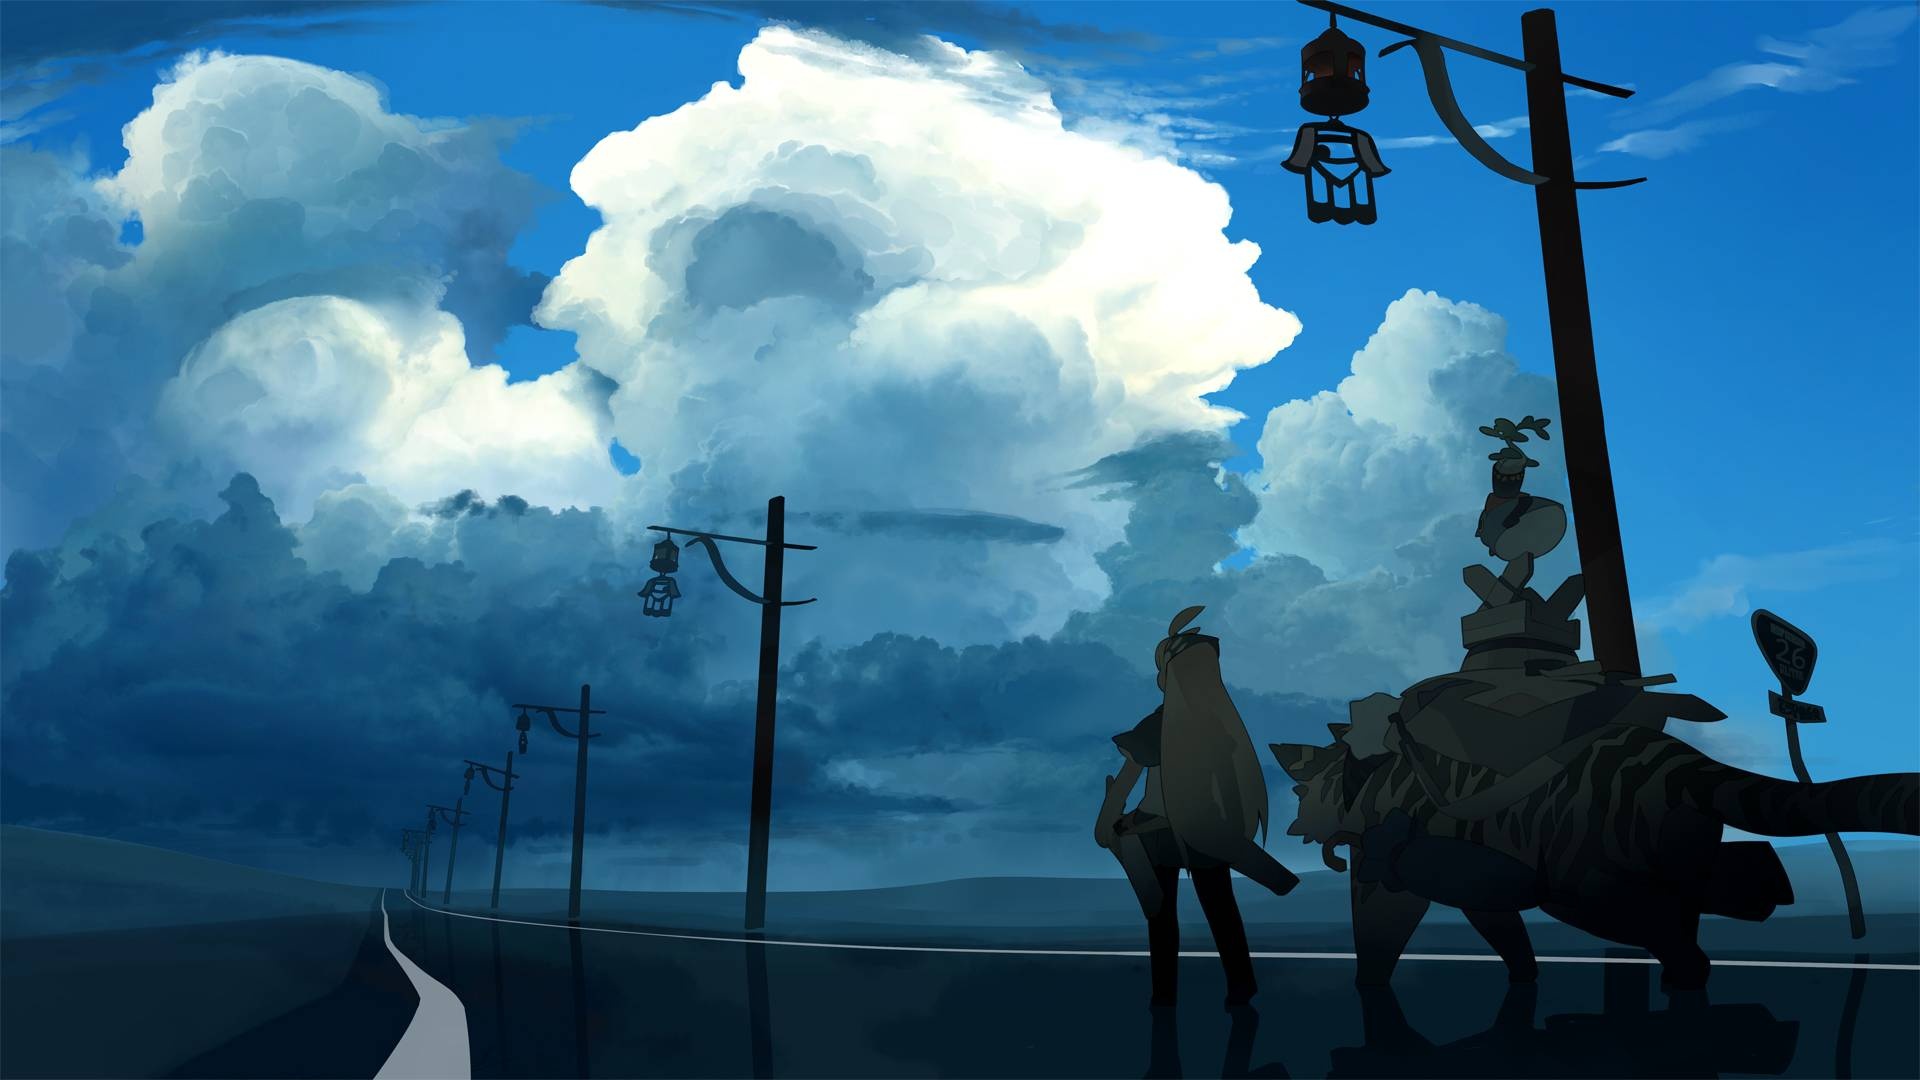 Anime Landscape With Clouds background picture